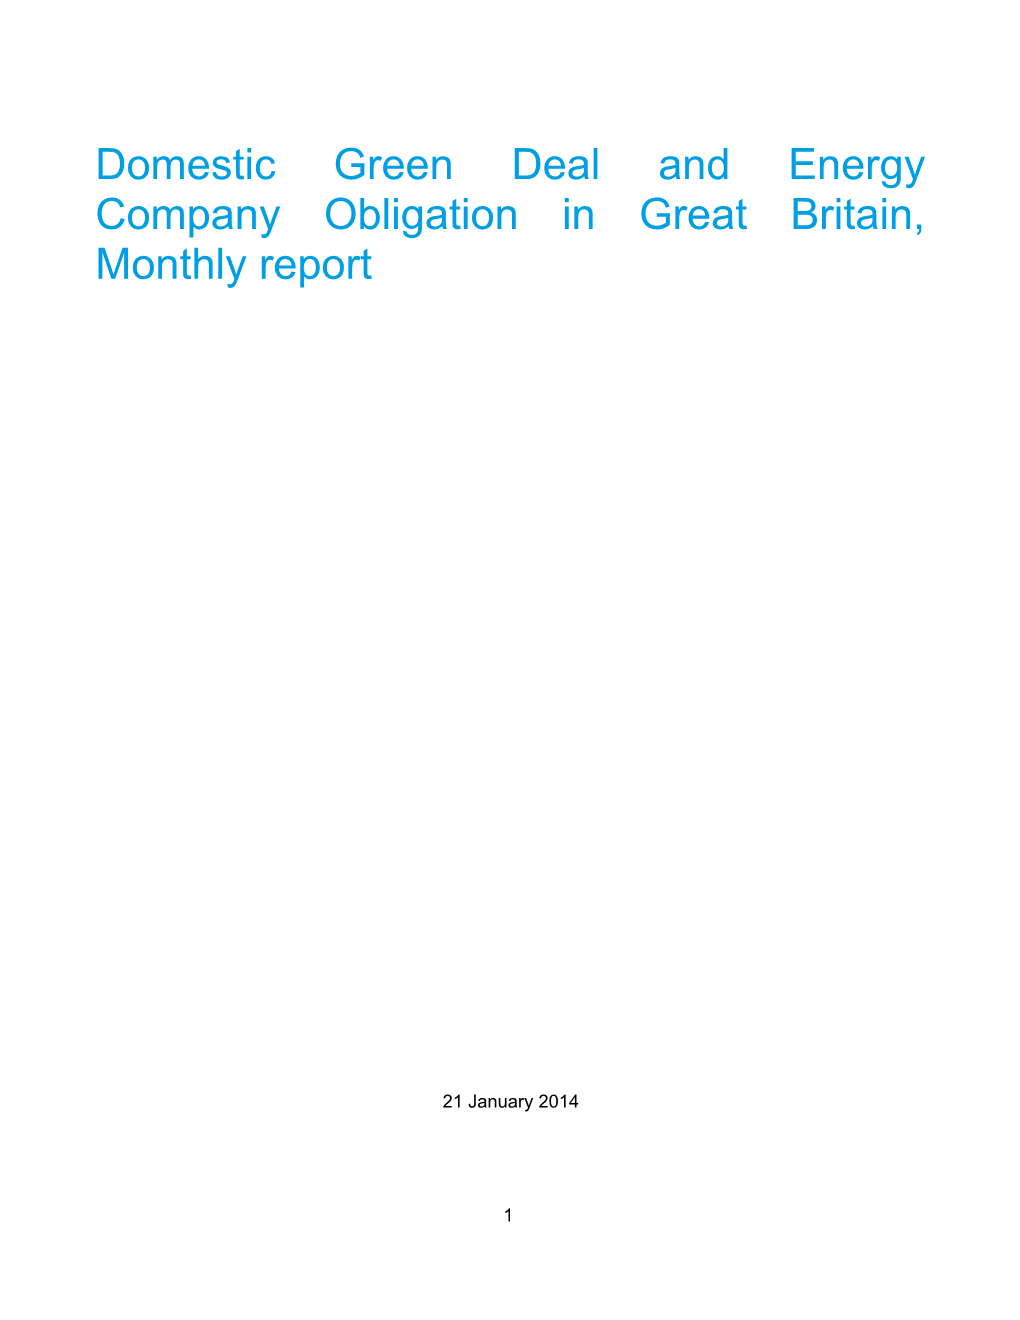 Domestic Green Deal and Energy Company Obligation in Great Britain, Monthly Report